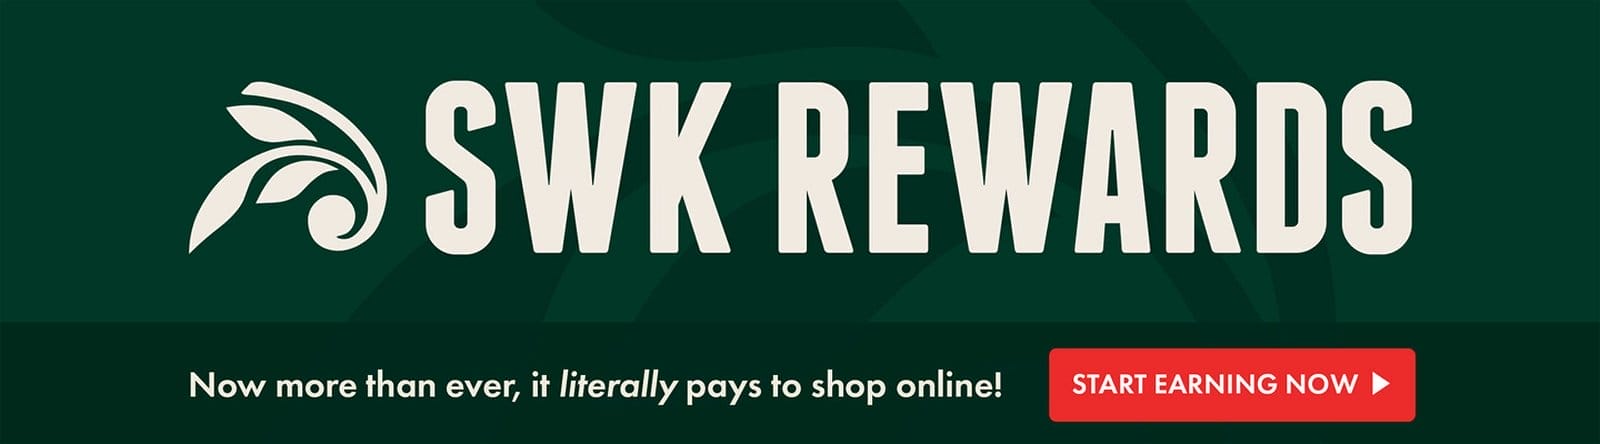 SWK REWARDS - Now more than ever, it literally pays to shop online! START EARNING NOW